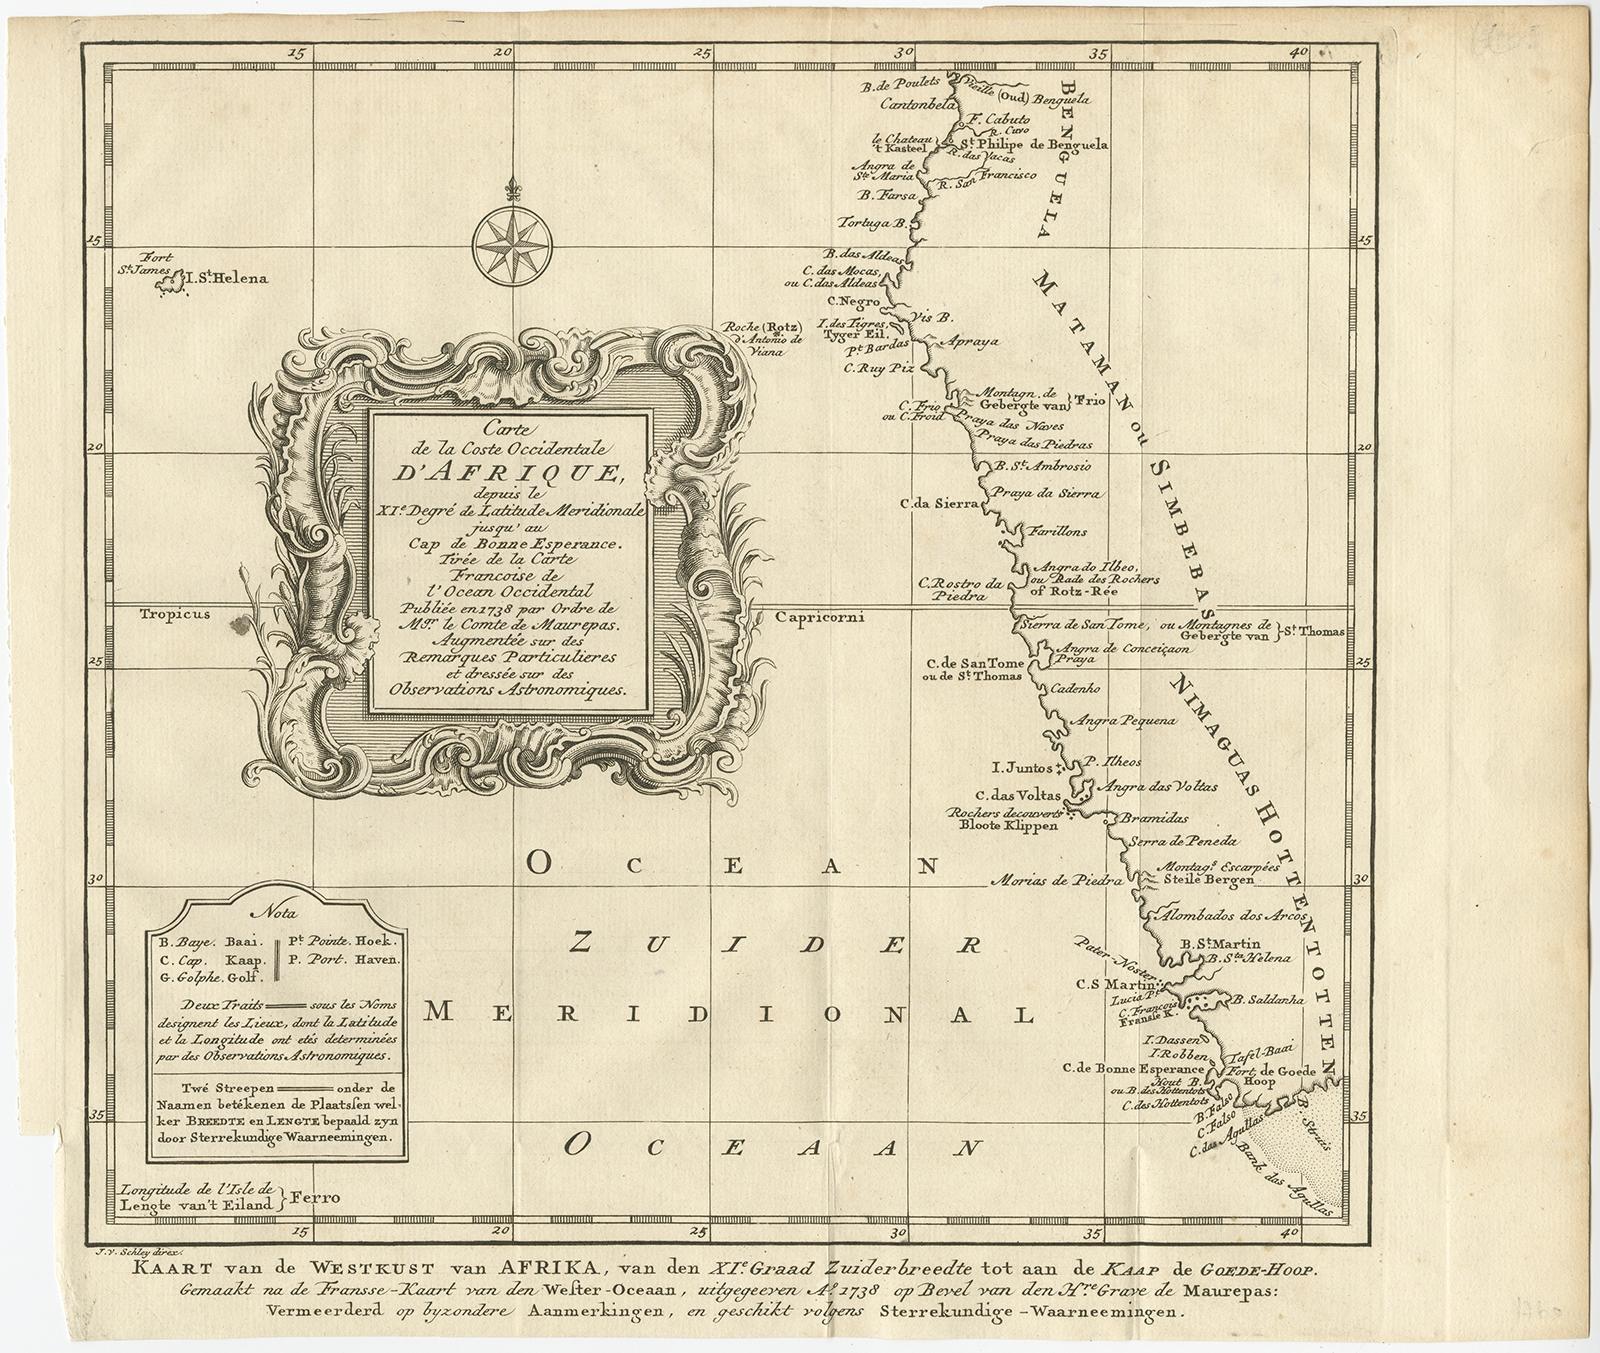 Antique map of the Coast of Africa titled 'Kaart van de West Kust van Afrika (..)'. 

Map of the west coast of Africa, from 11 degrees south latitude to the Cape of Good Hope. This map originates from a Dutch edition of Prévost's 'Histoire